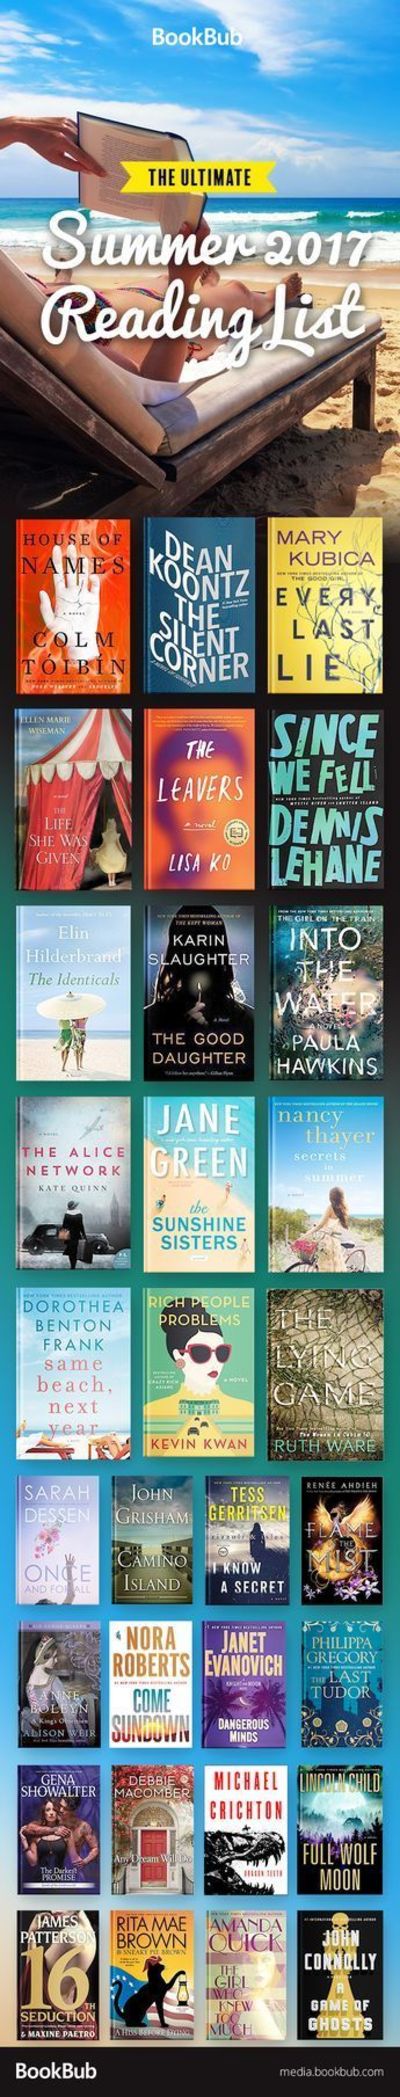 From thrillers to historical fiction, these are summer's hottest books.